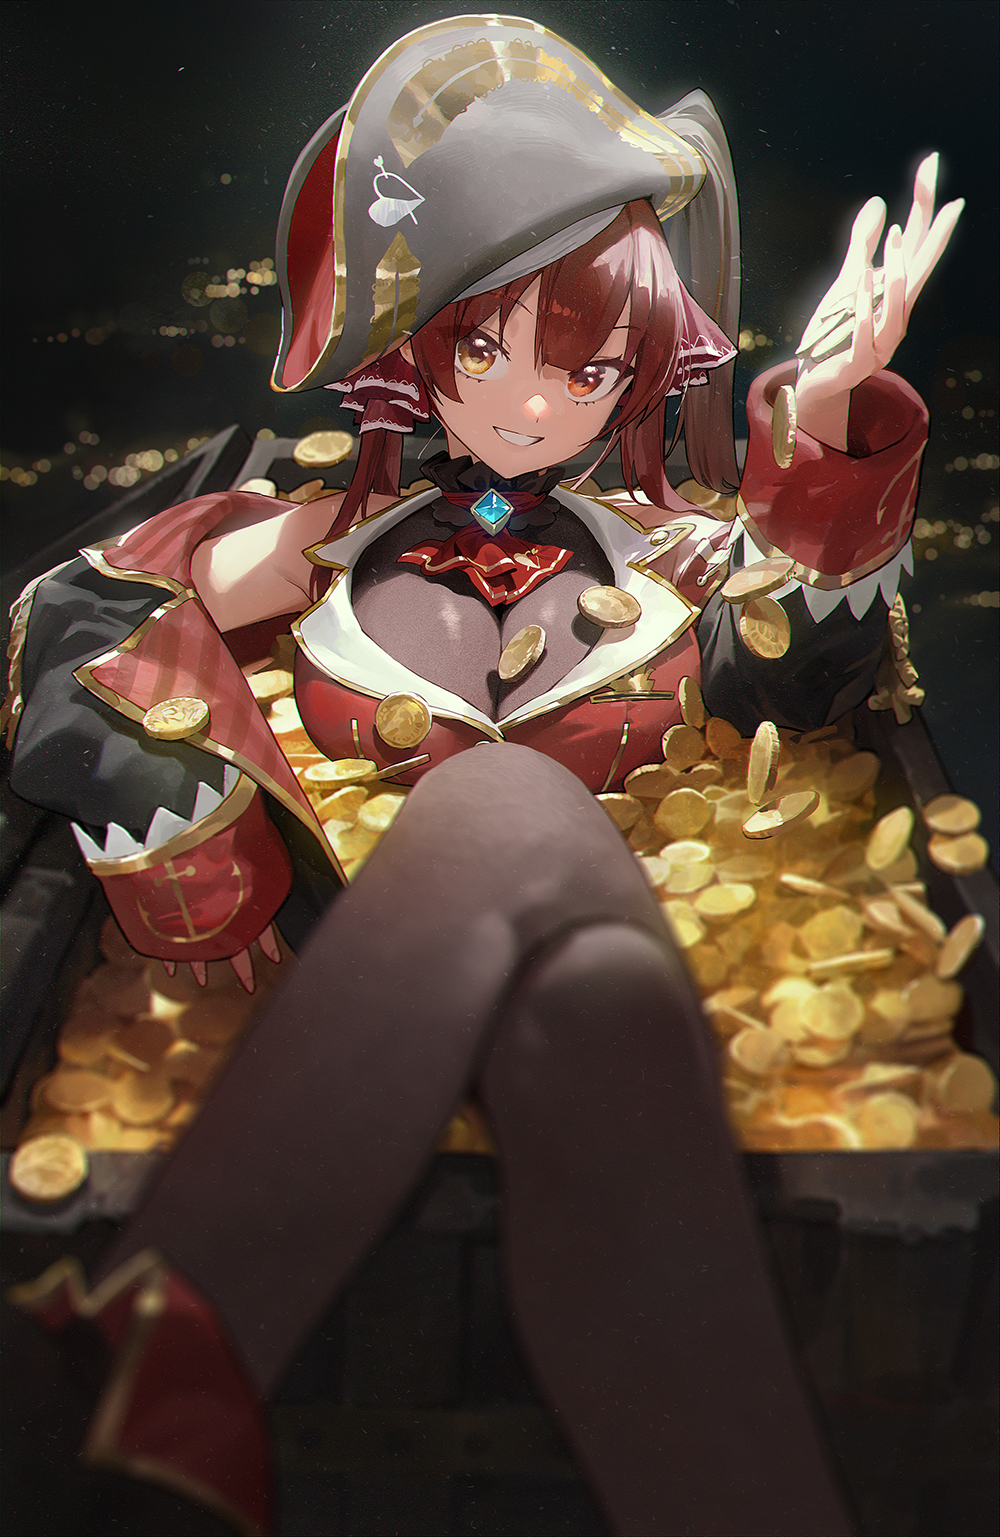 Anime 1000x1537 anime anime girls artwork portrait display 2D Mossi (artist) Hololive Virtual Youtuber Houshou Marine redhead heterochromia pirate hat coins treasure chest hat women with hats legs legs crossed smiling